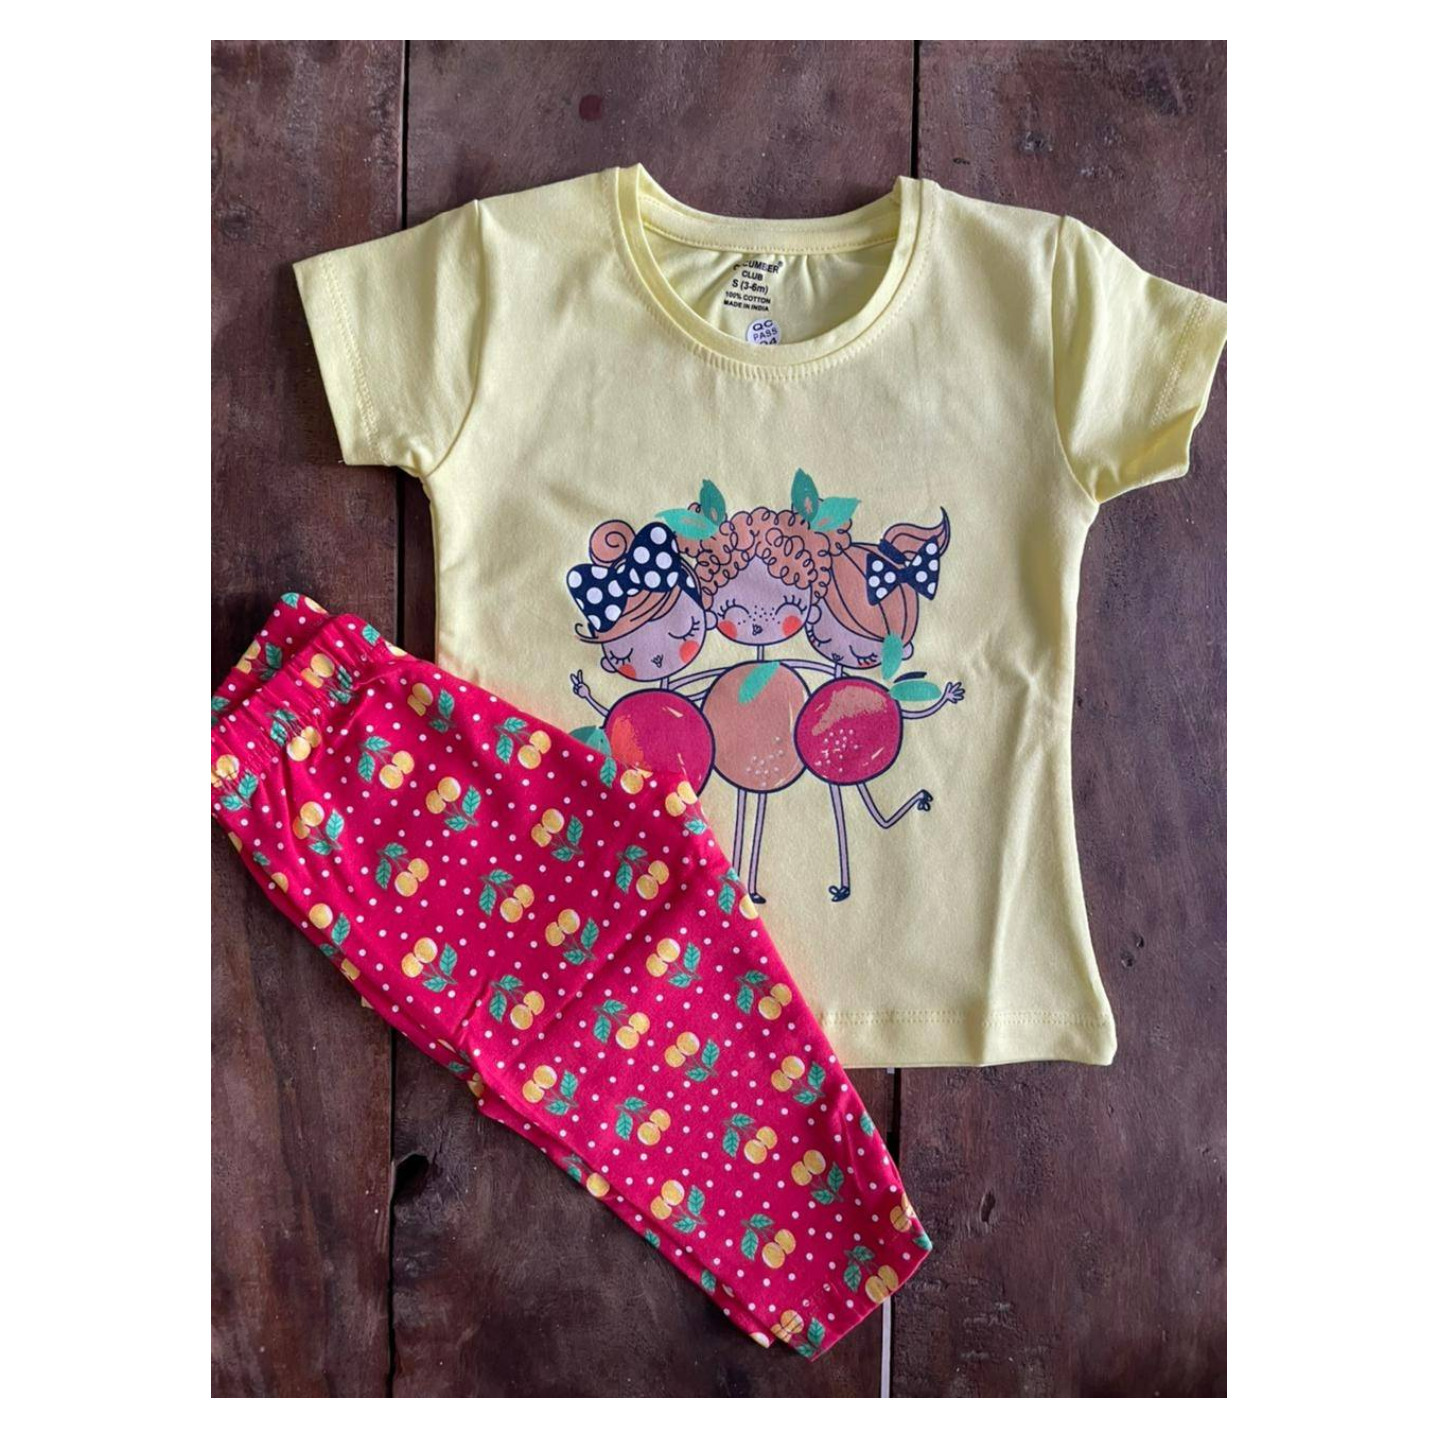 Cucumber Club Half Sleeves Top & Leggings Rs 320 Only Made In India 0 to 12 Months Size